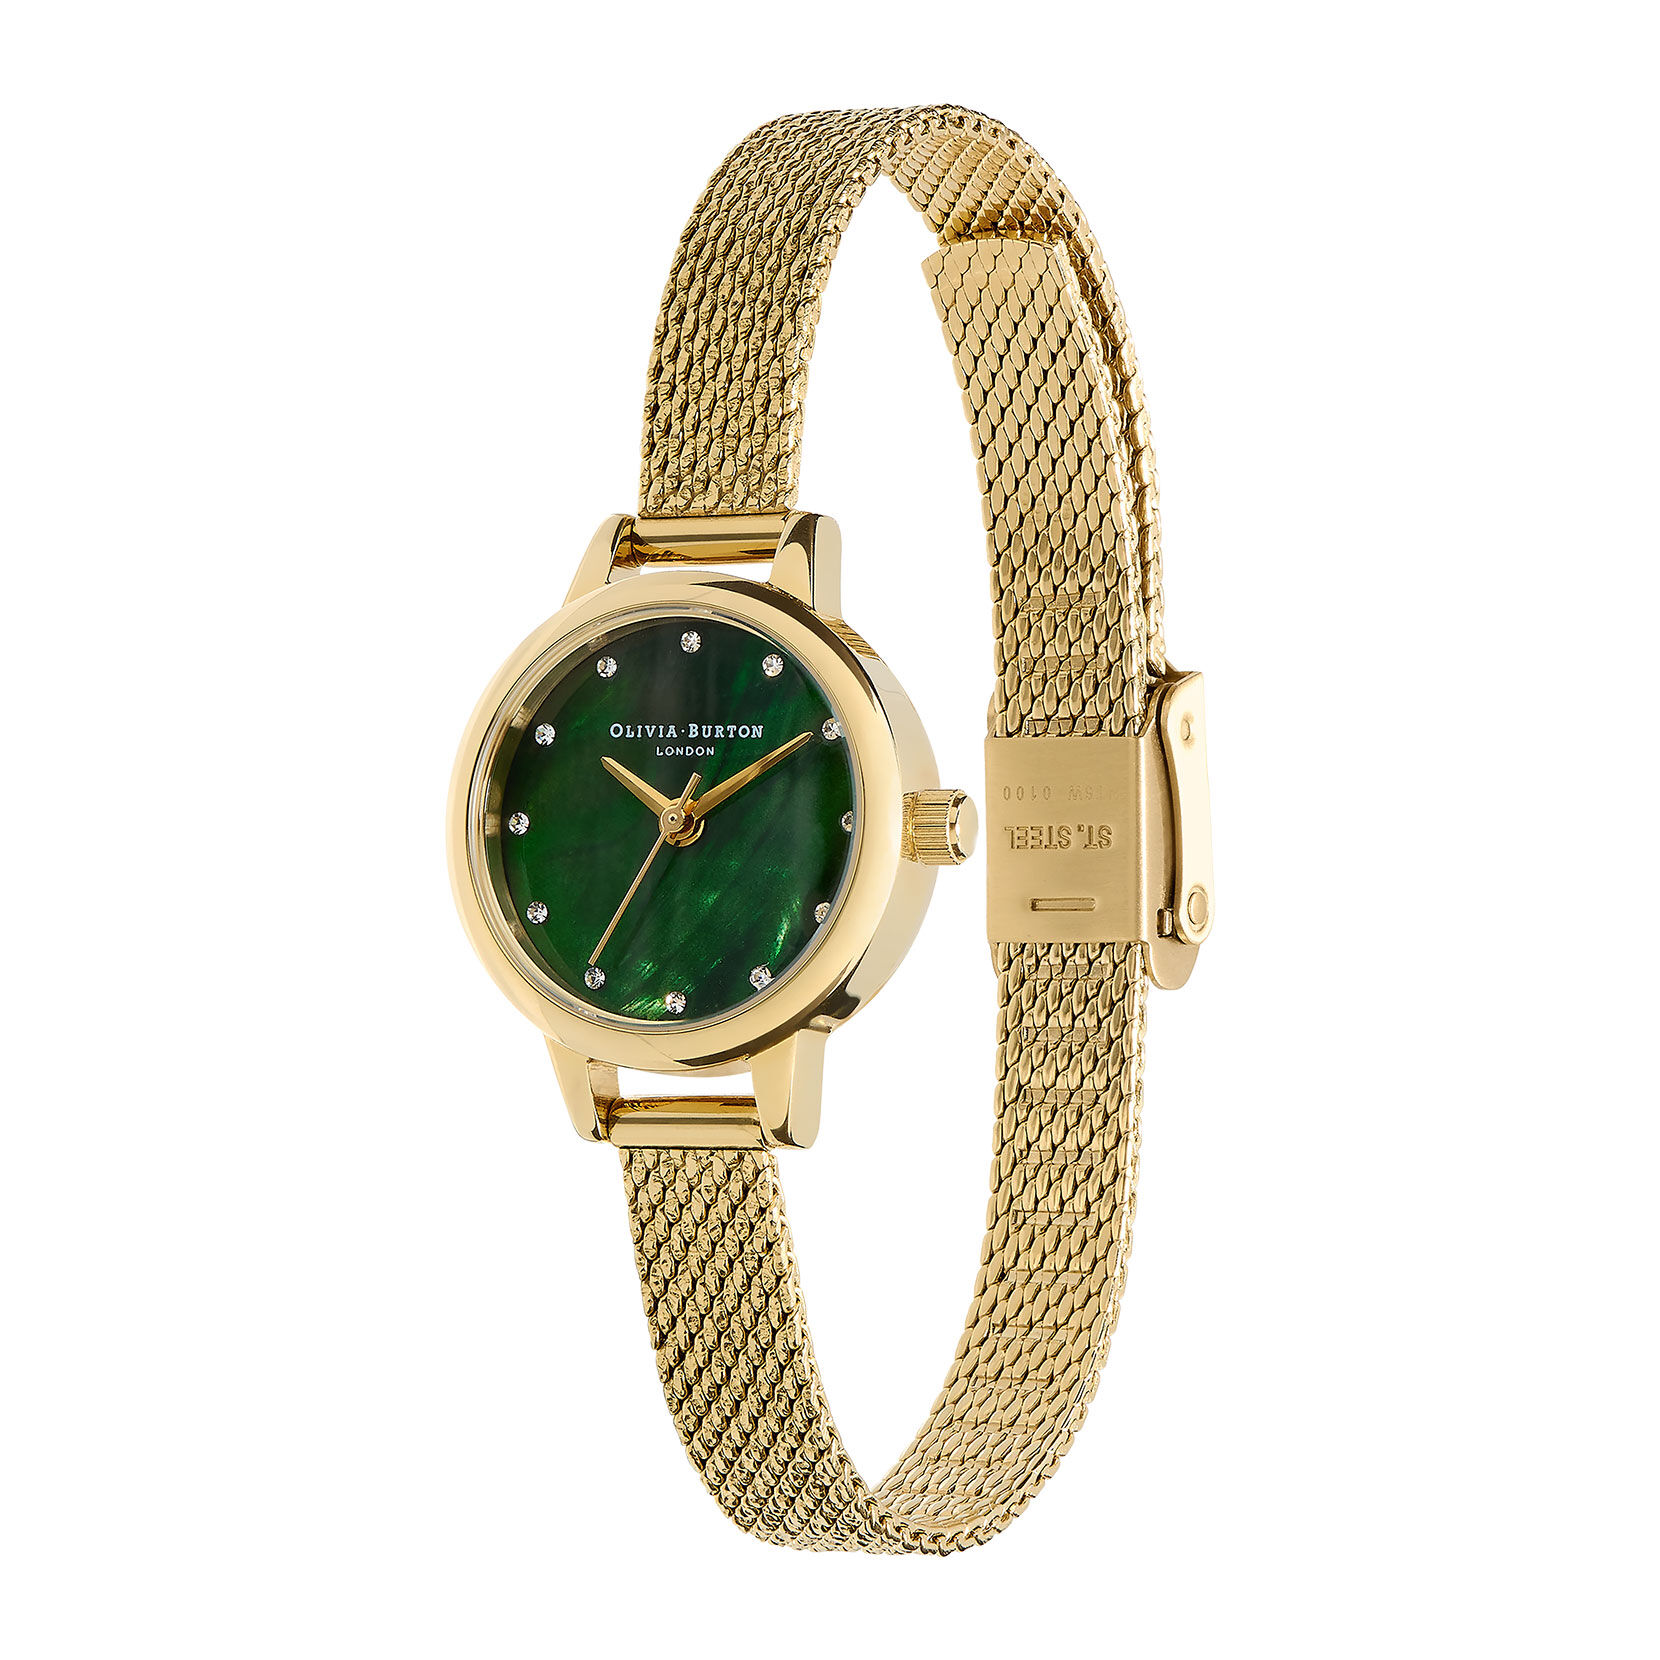 Classic Mini Dial Green Mother of Pearl & Gold Mesh Watch